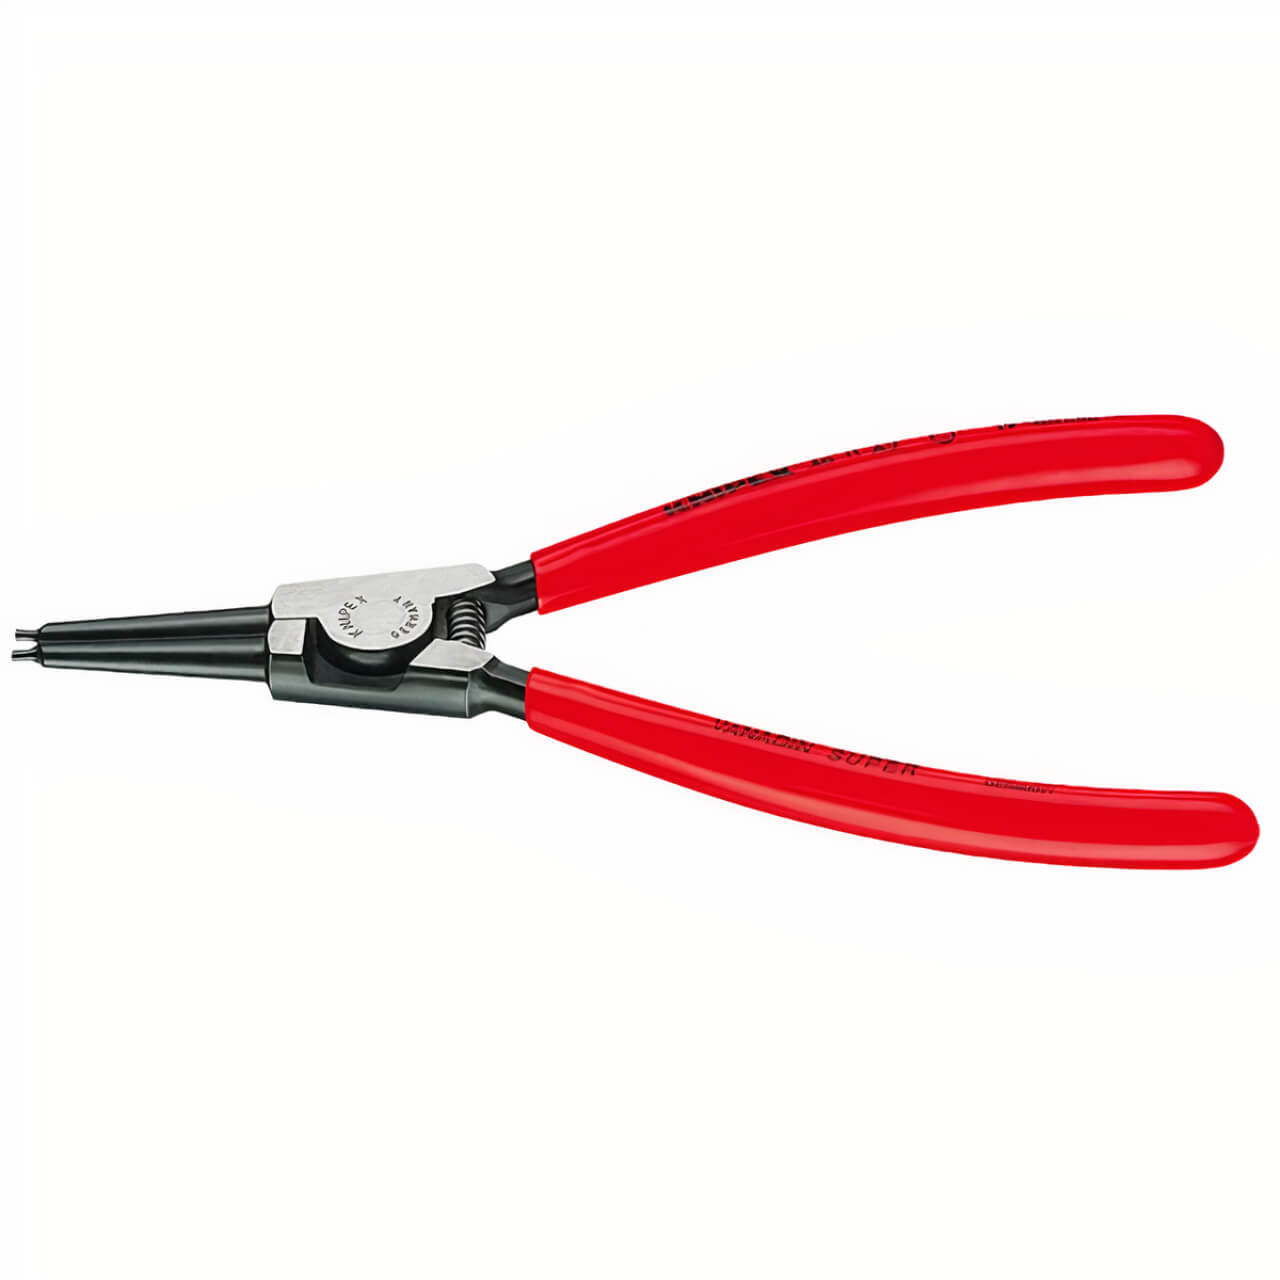 Knipex 140mm Straight Tip 3-10mm External Circlip Pliers